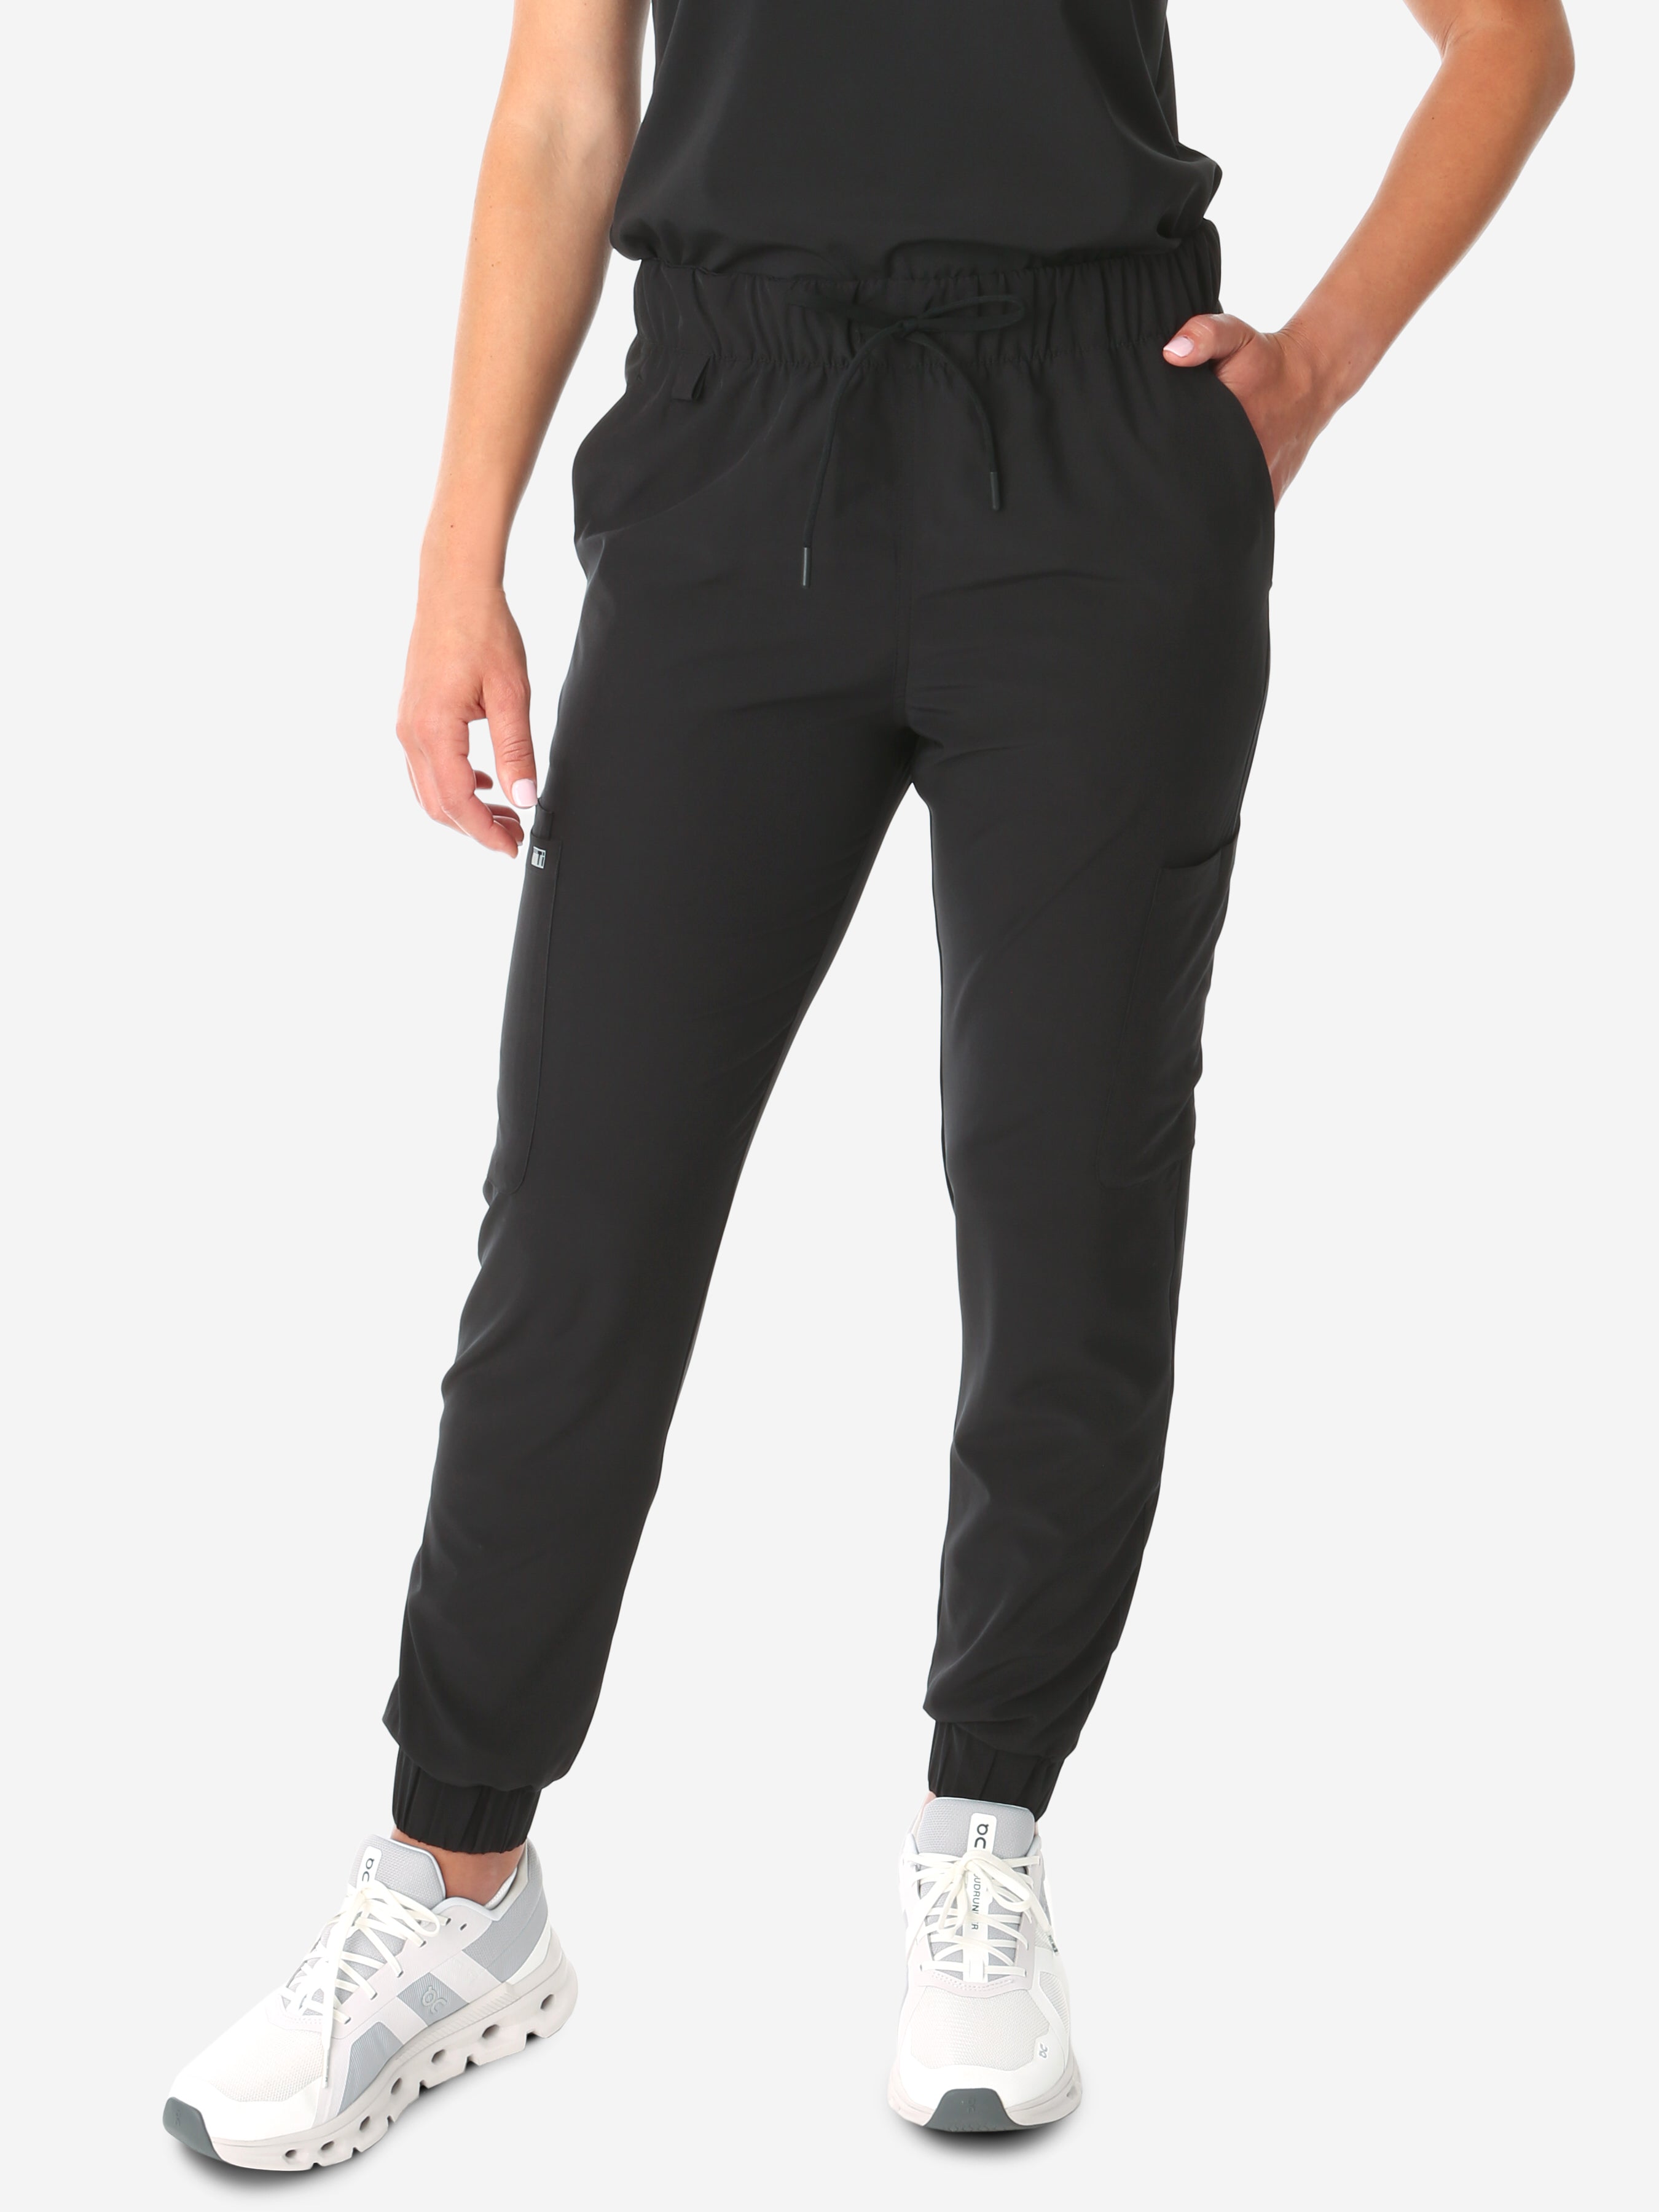 TiScrubs Real Black Women's Stretch Perfect Jogger Pants Front View Pants Only